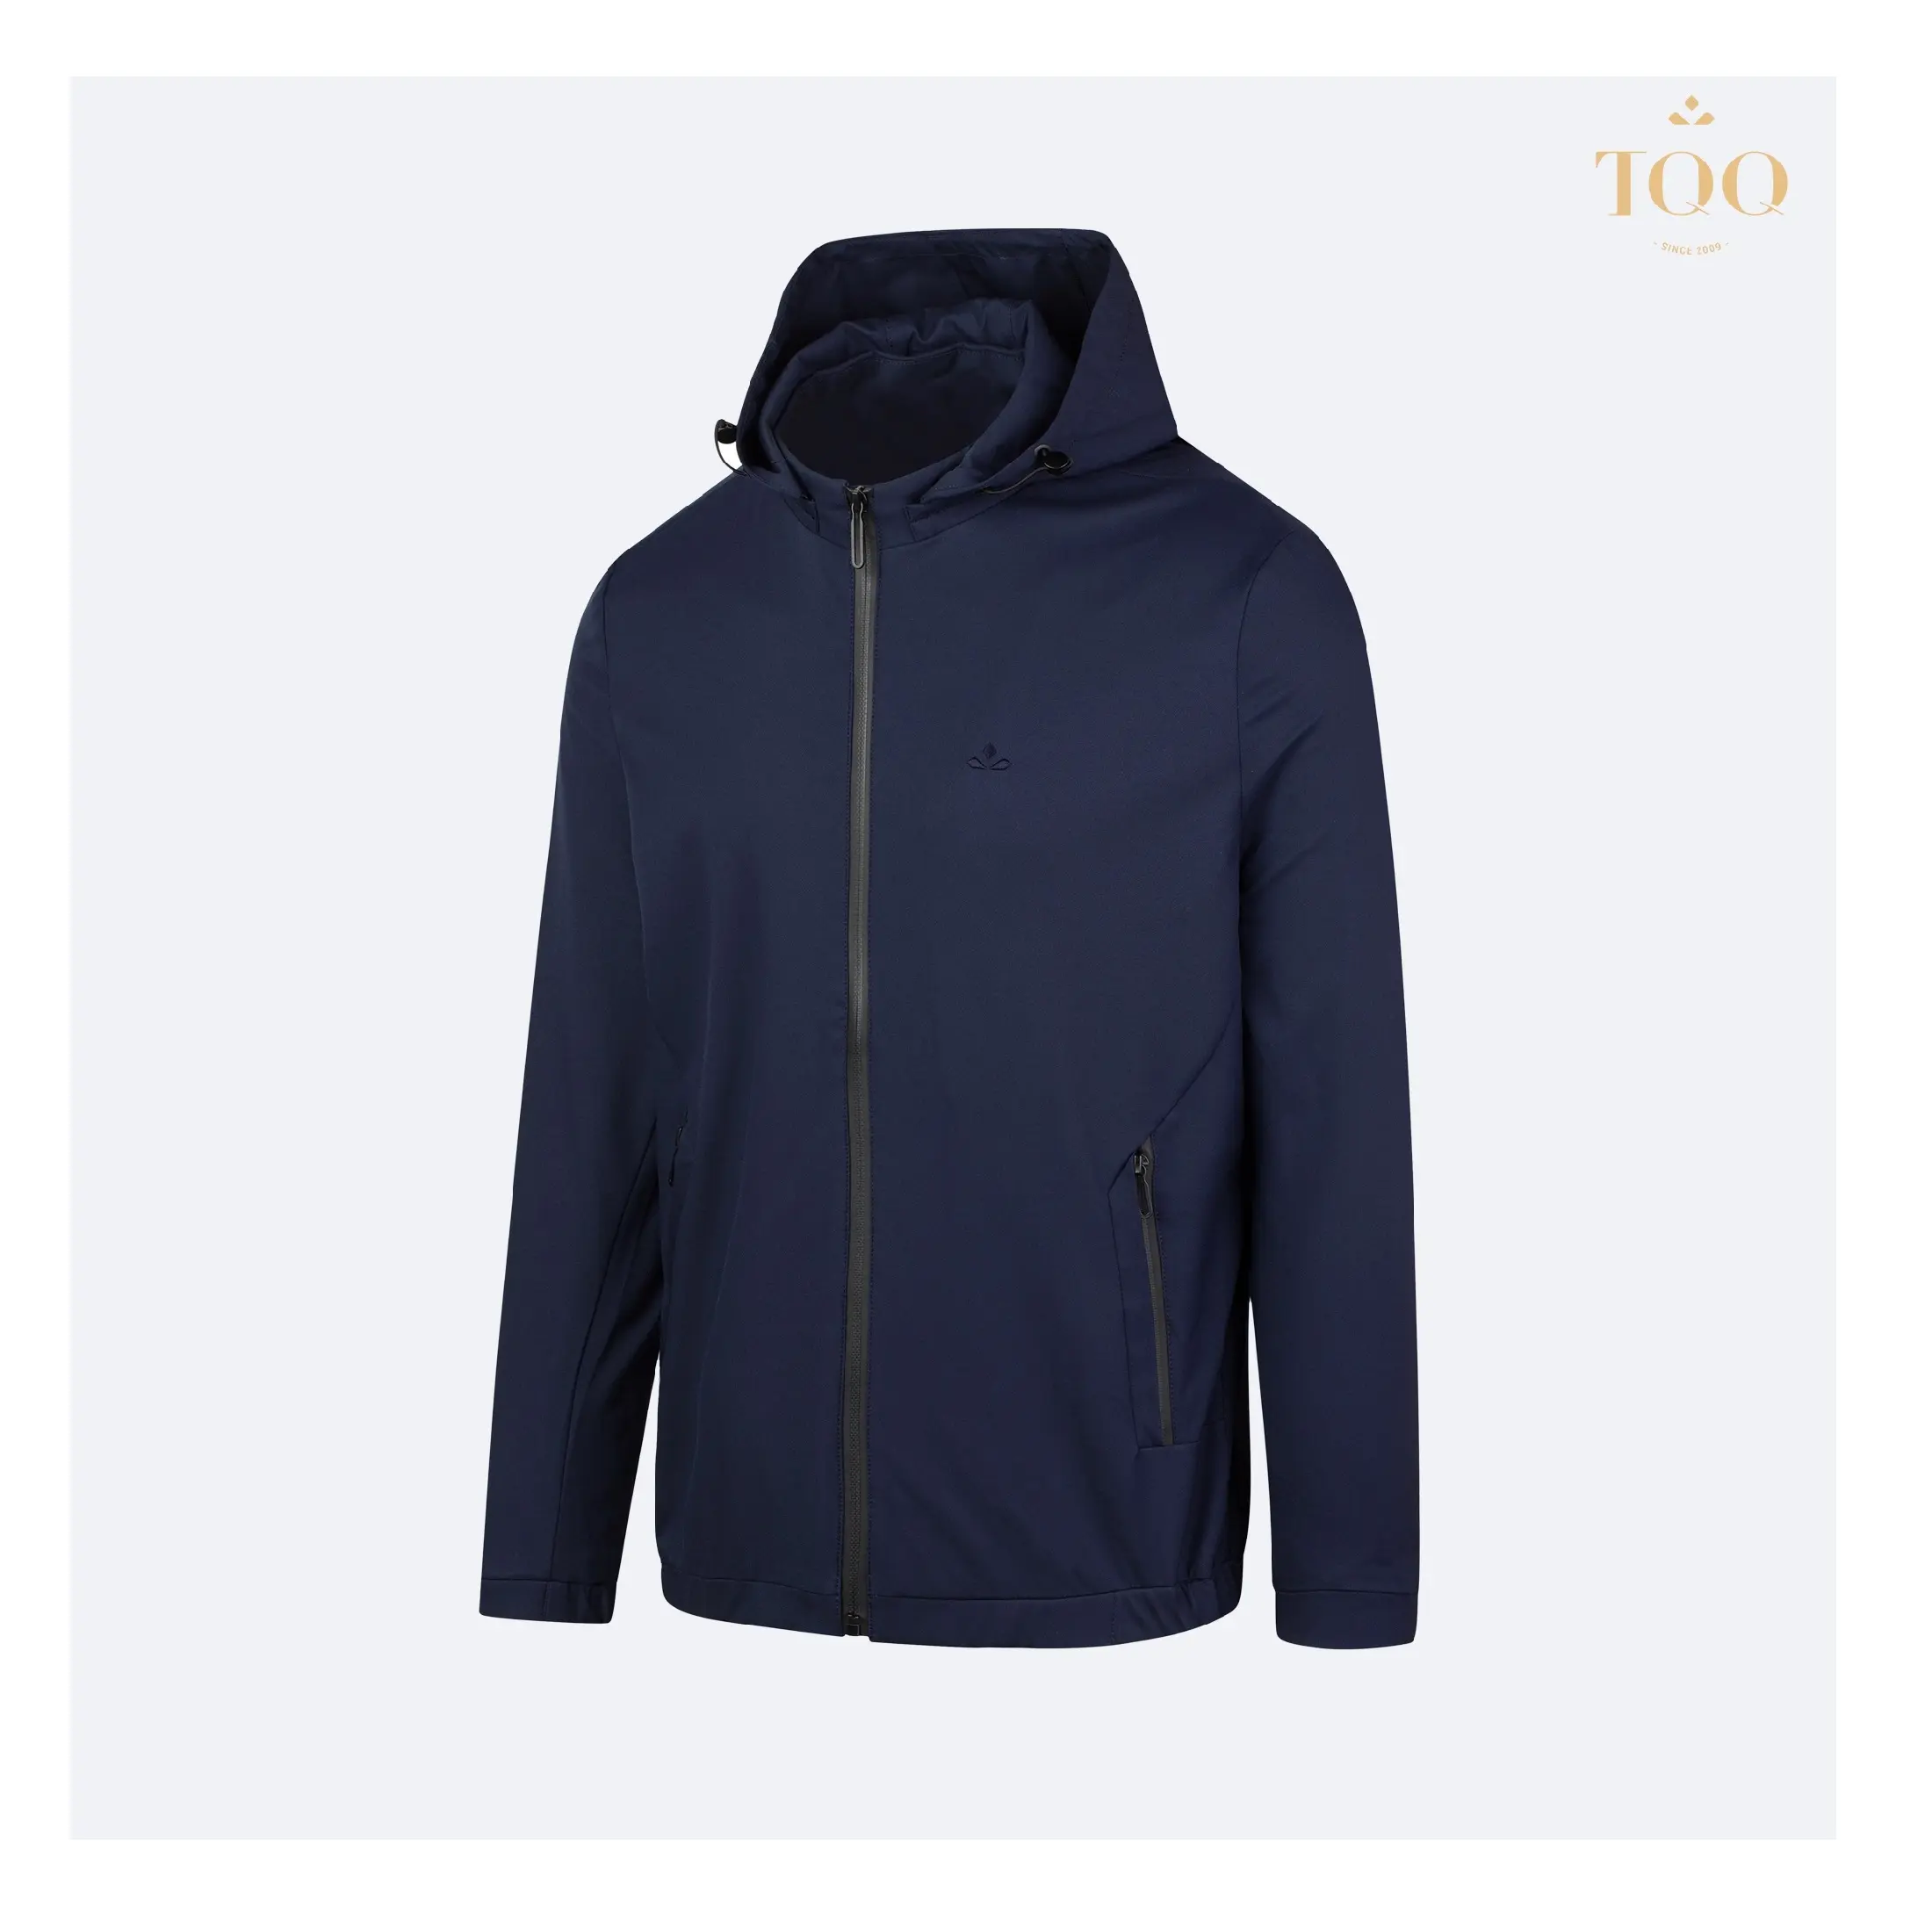 Regular Polyester Casual jackets for men Stand Collar Light Weight Jacket with Detachable Hood in Navy style Length Zipper